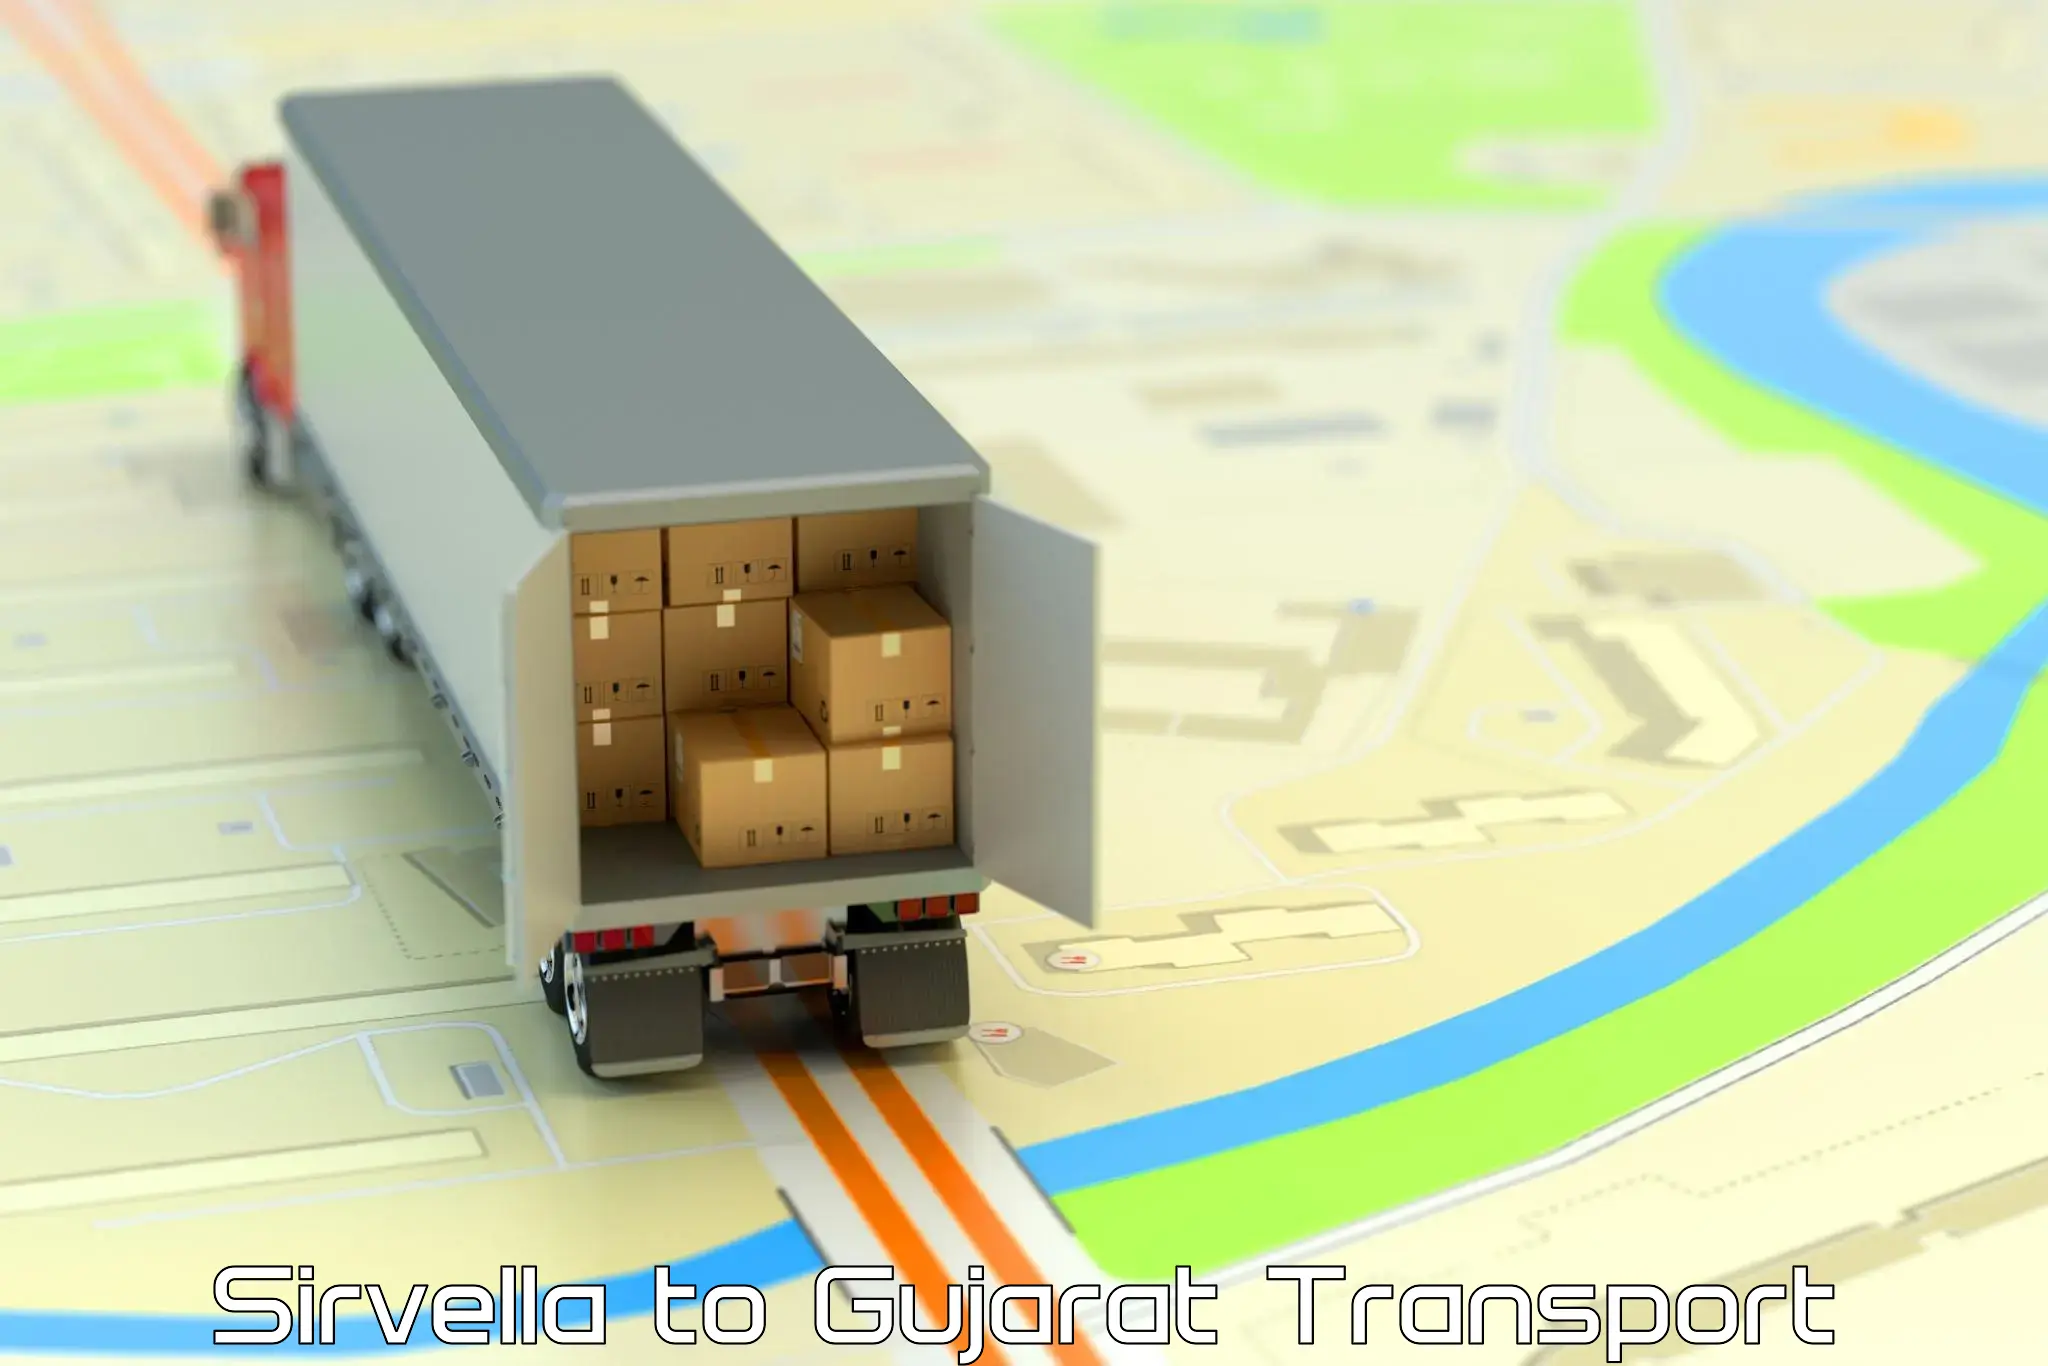 Commercial transport service Sirvella to Vansda